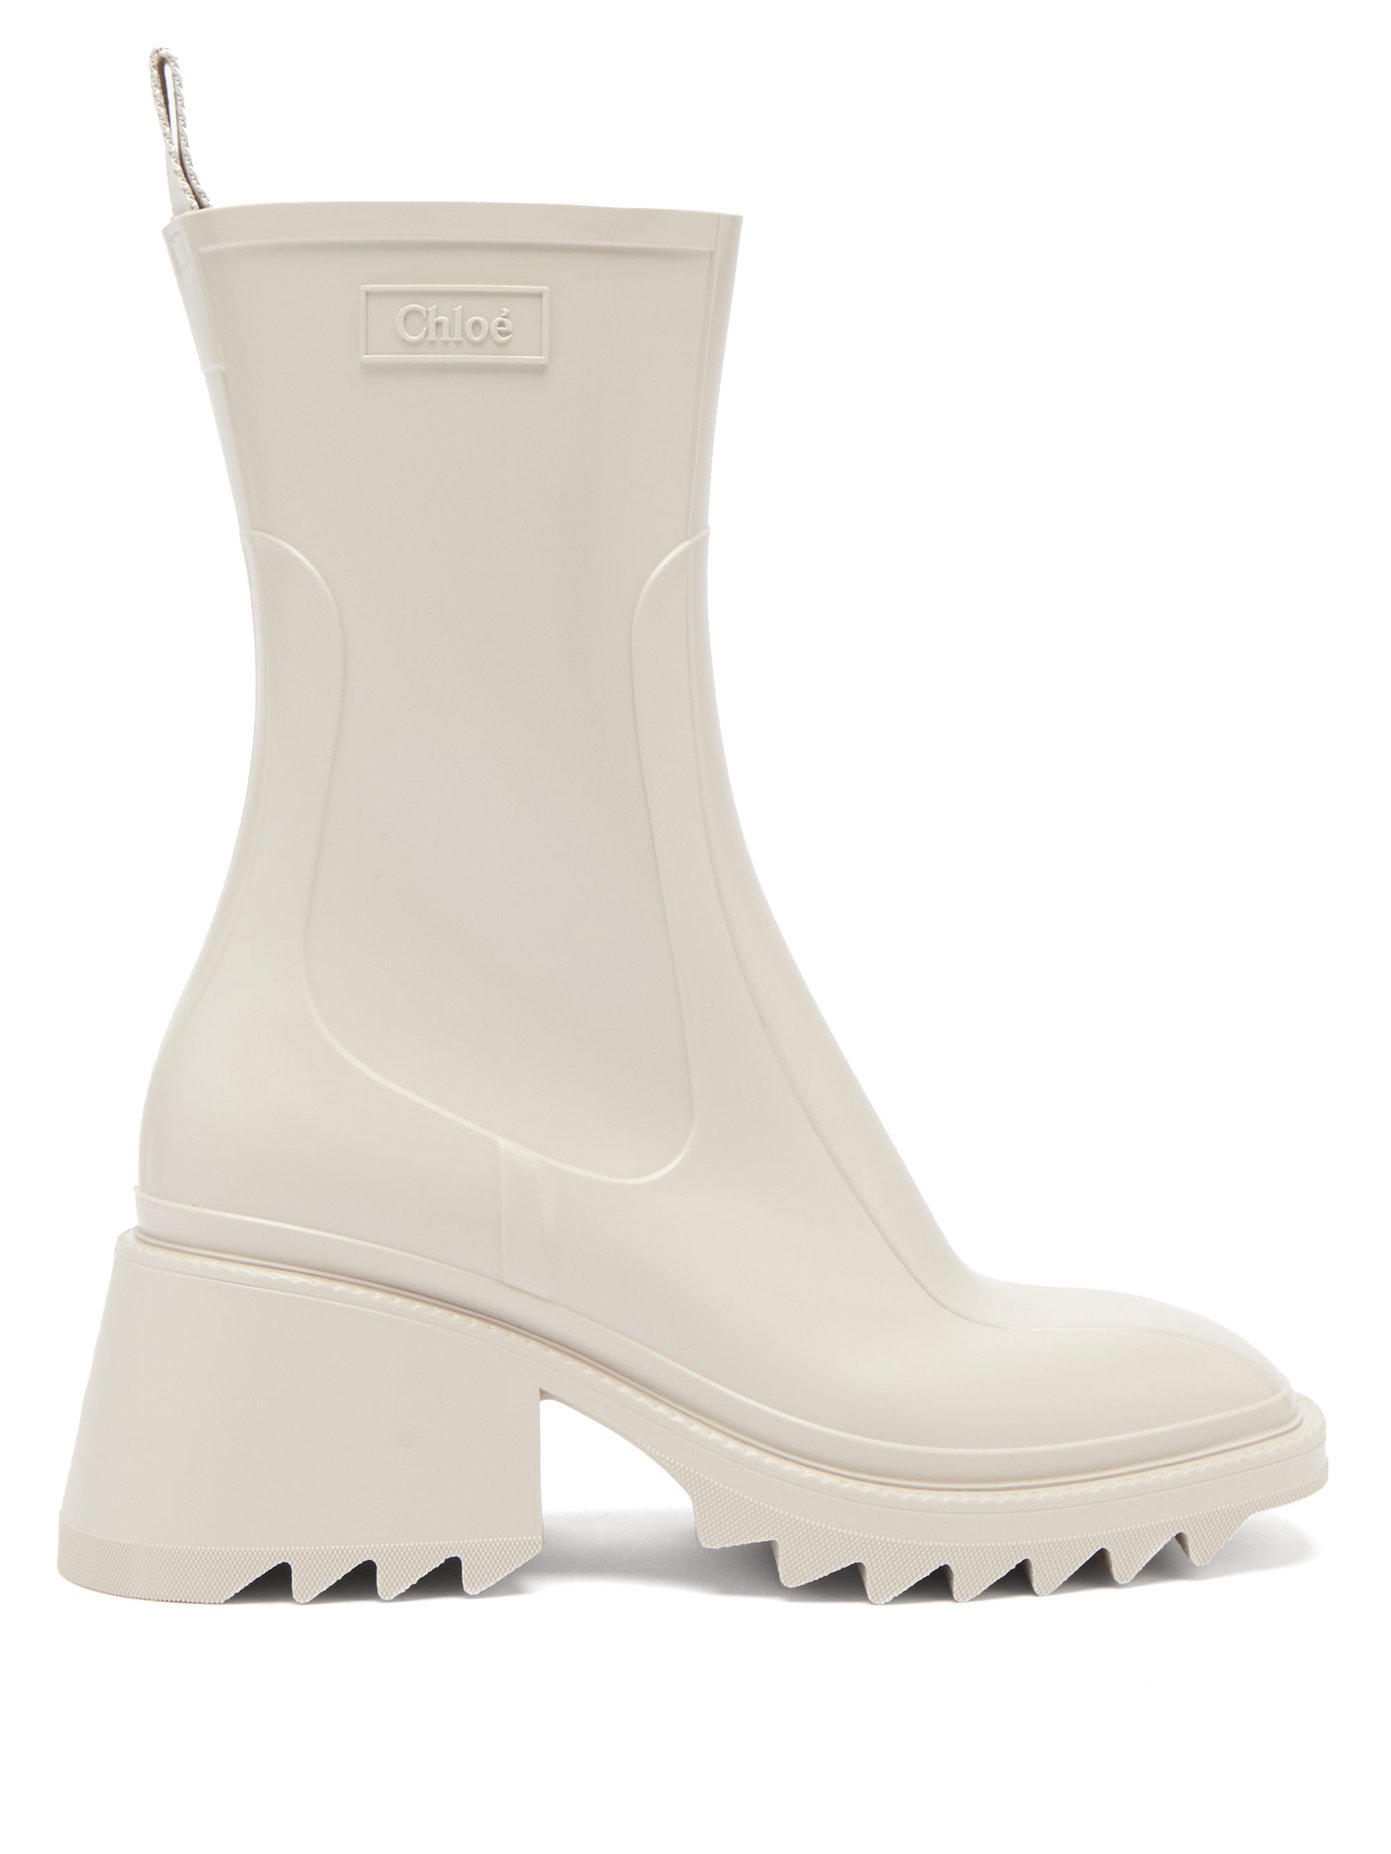 Betty heeled rubber boots | Chloé 